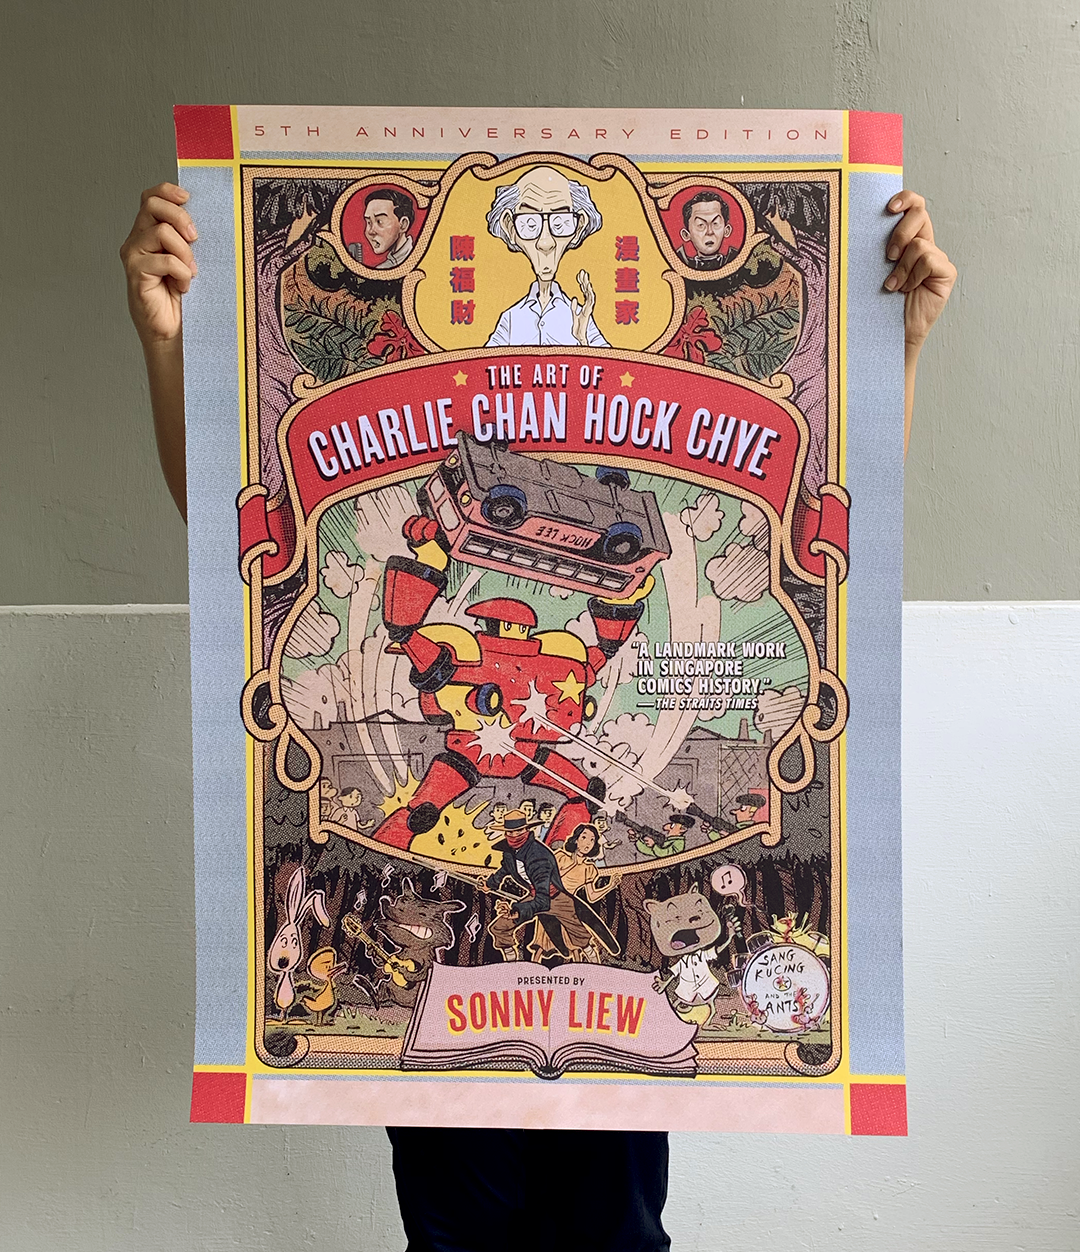 Poster of The Art of Charlie Chan Hock Chye (5th Anniversary Edition)